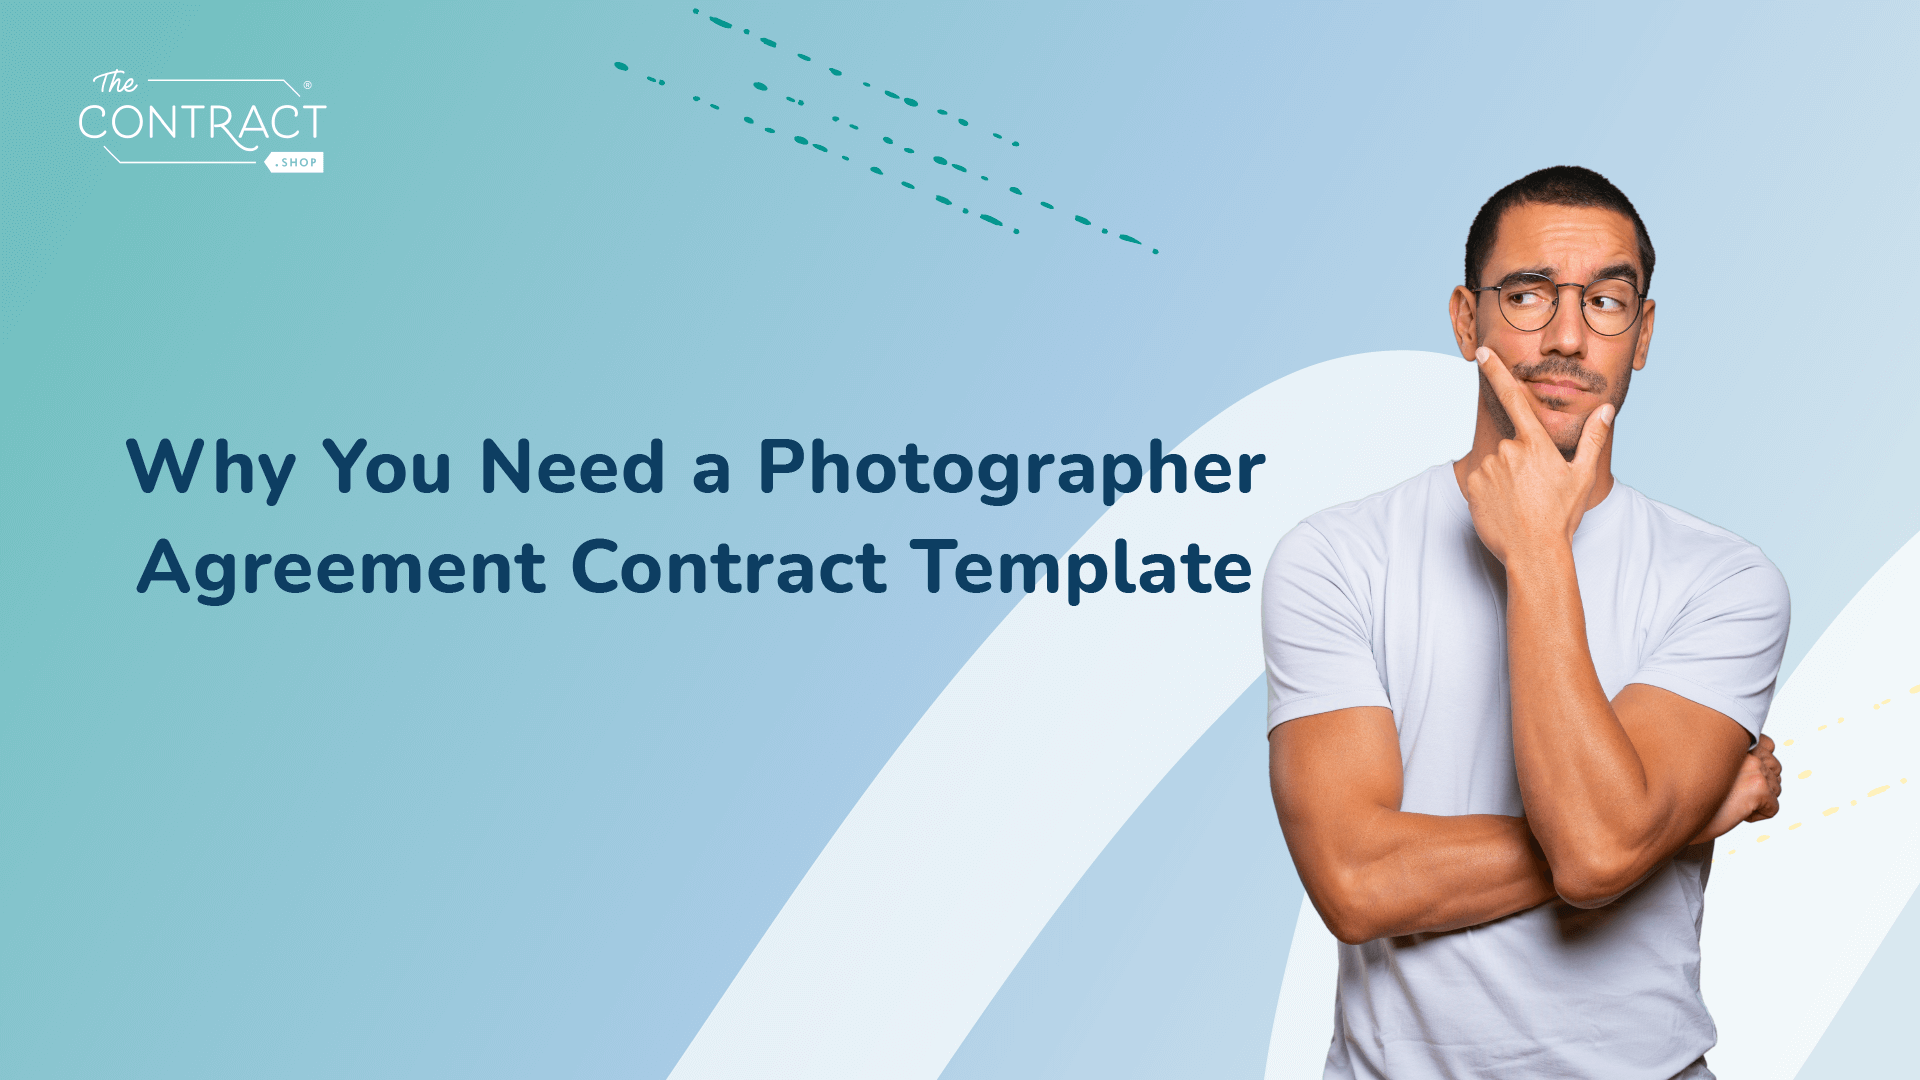 Why You Need a Photographer Agreement Contract Template